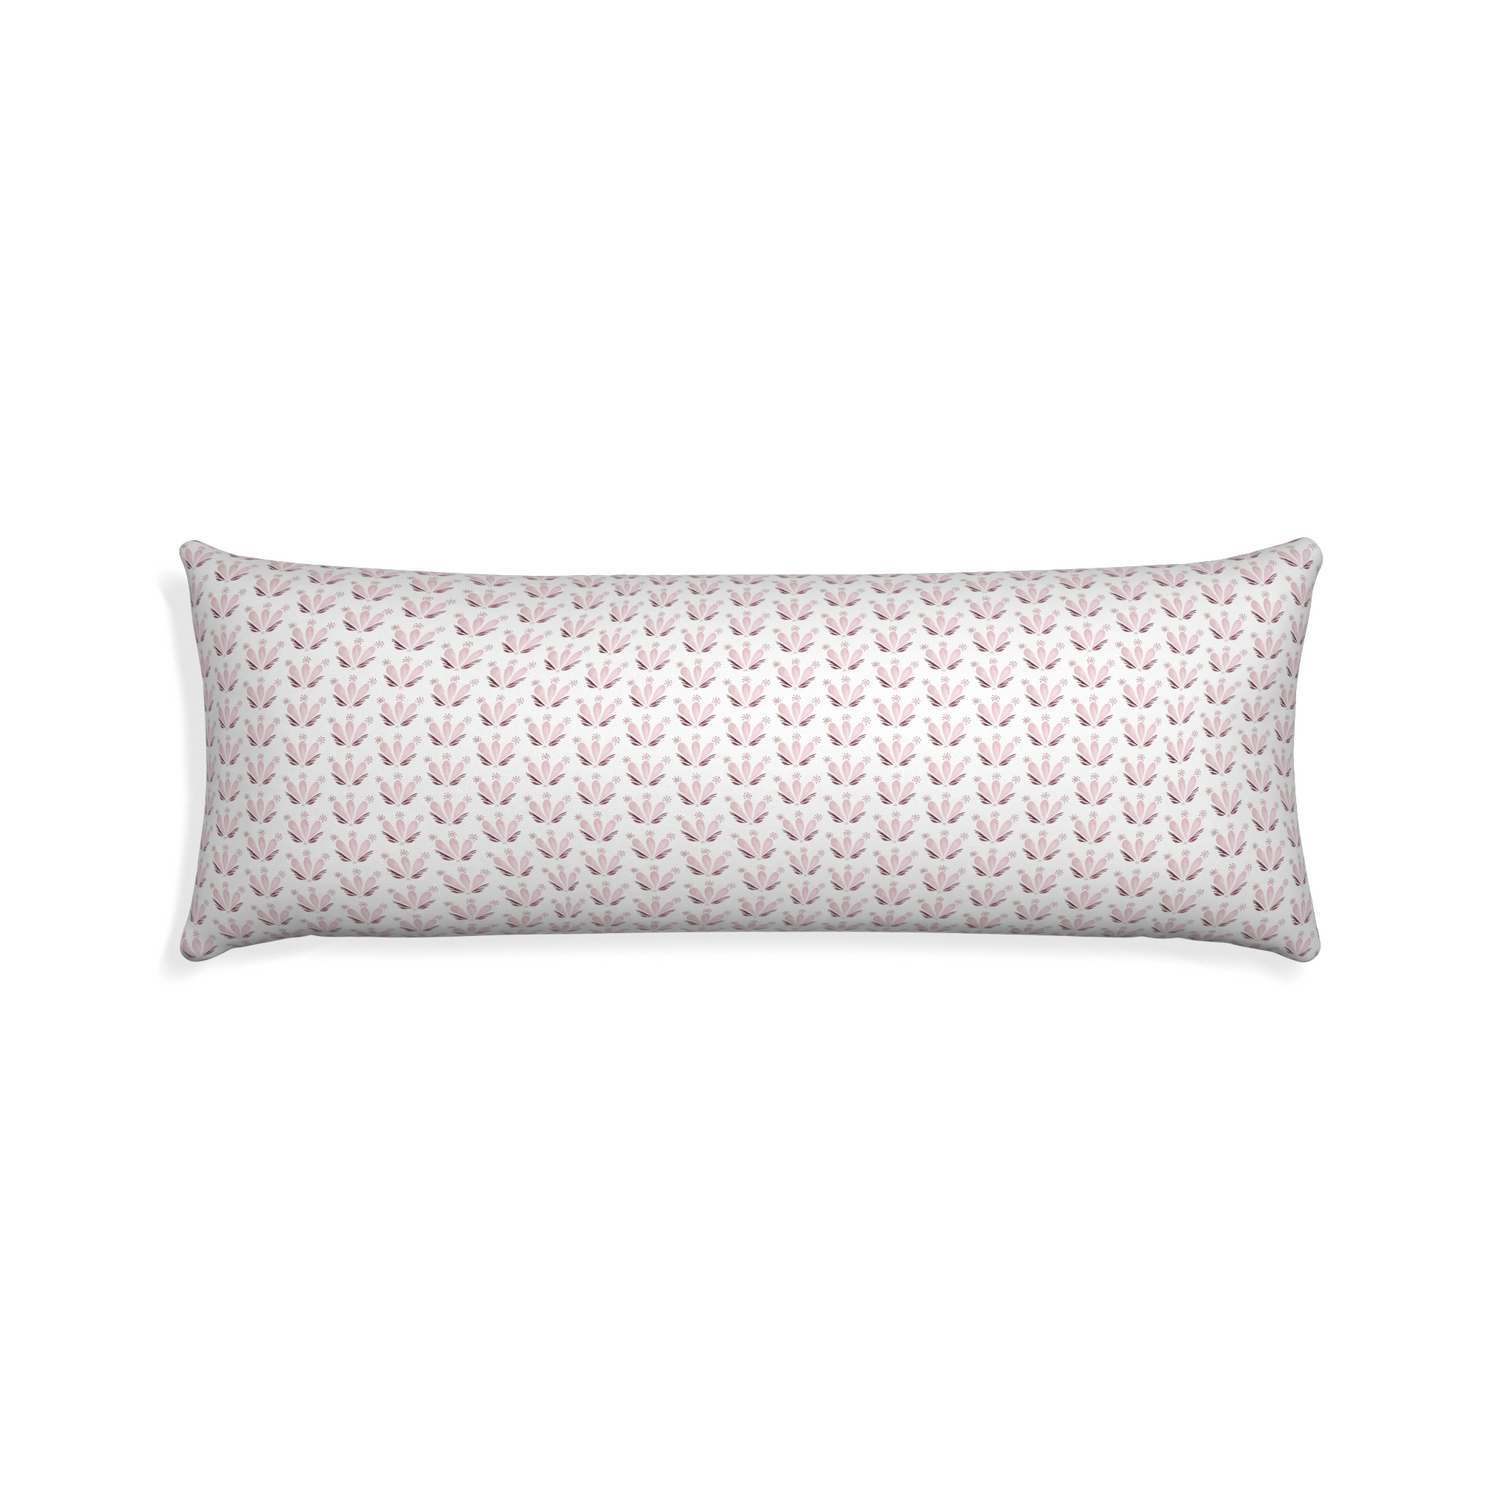 Xl-lumbar serena pink custom pillow with none on white background